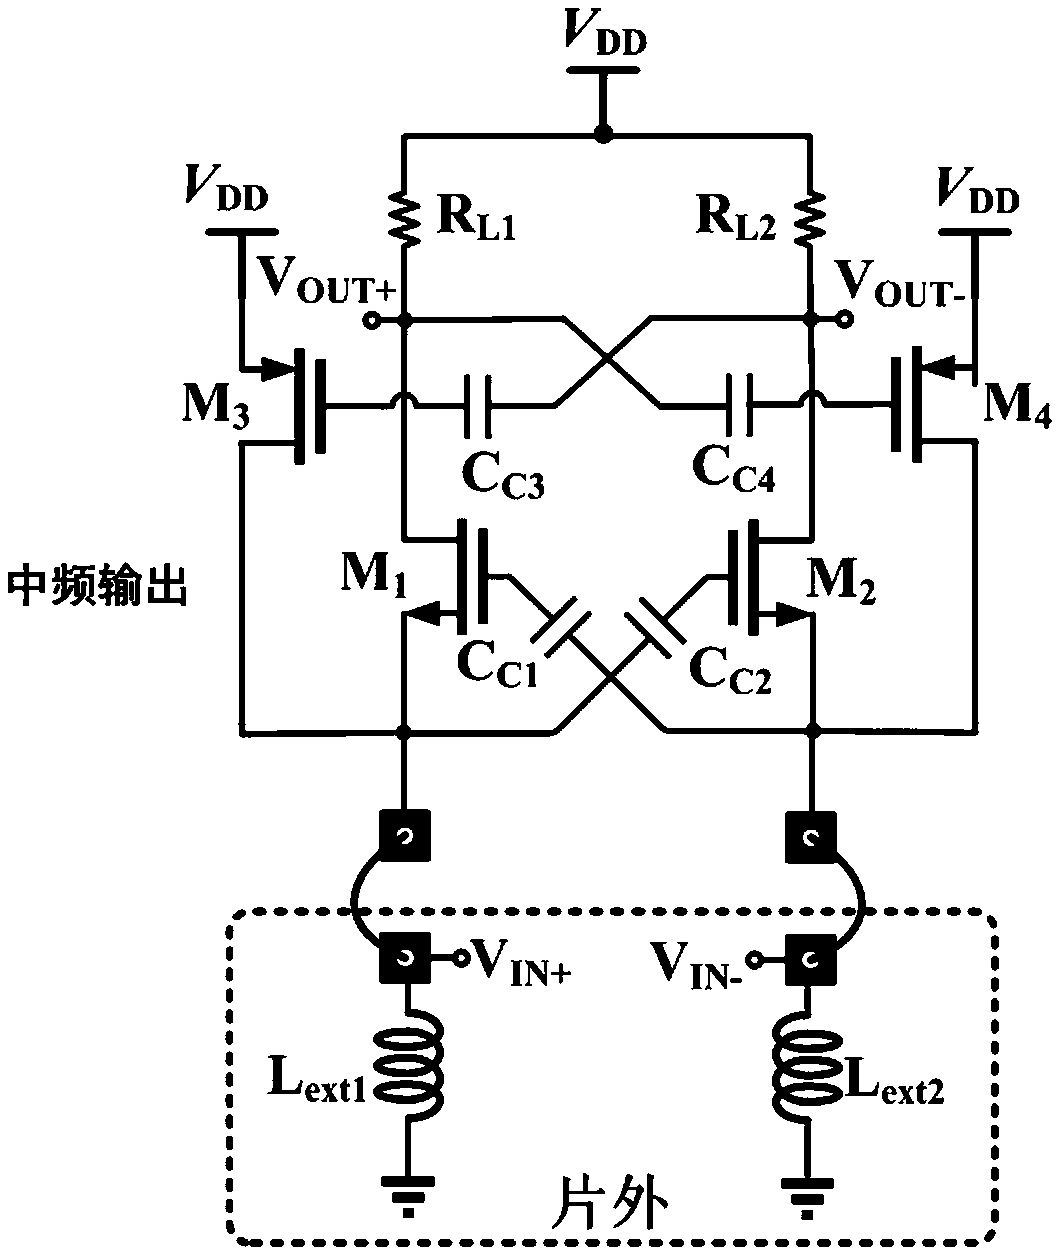 A receiver front-end circuit with current mode structure with enhanced out-of-band linearity